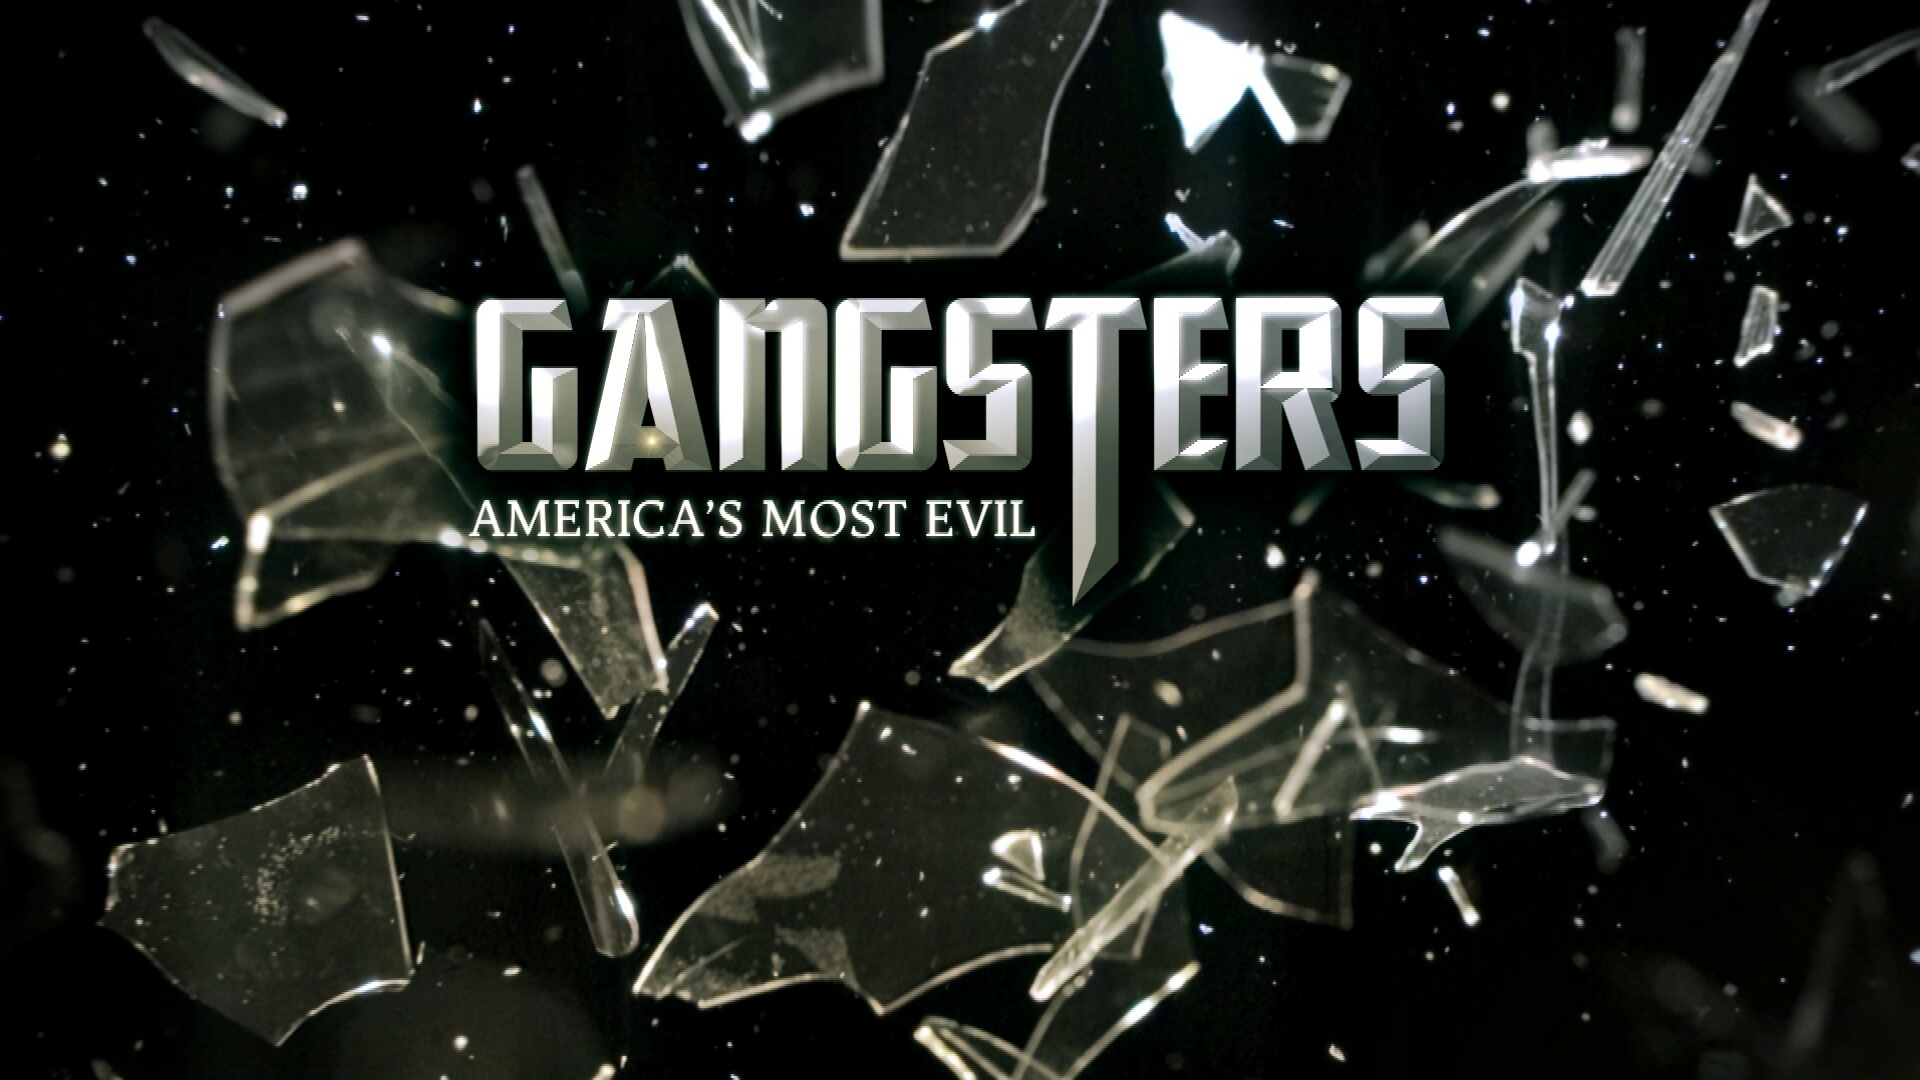 "Gansters" America's Most Evil"